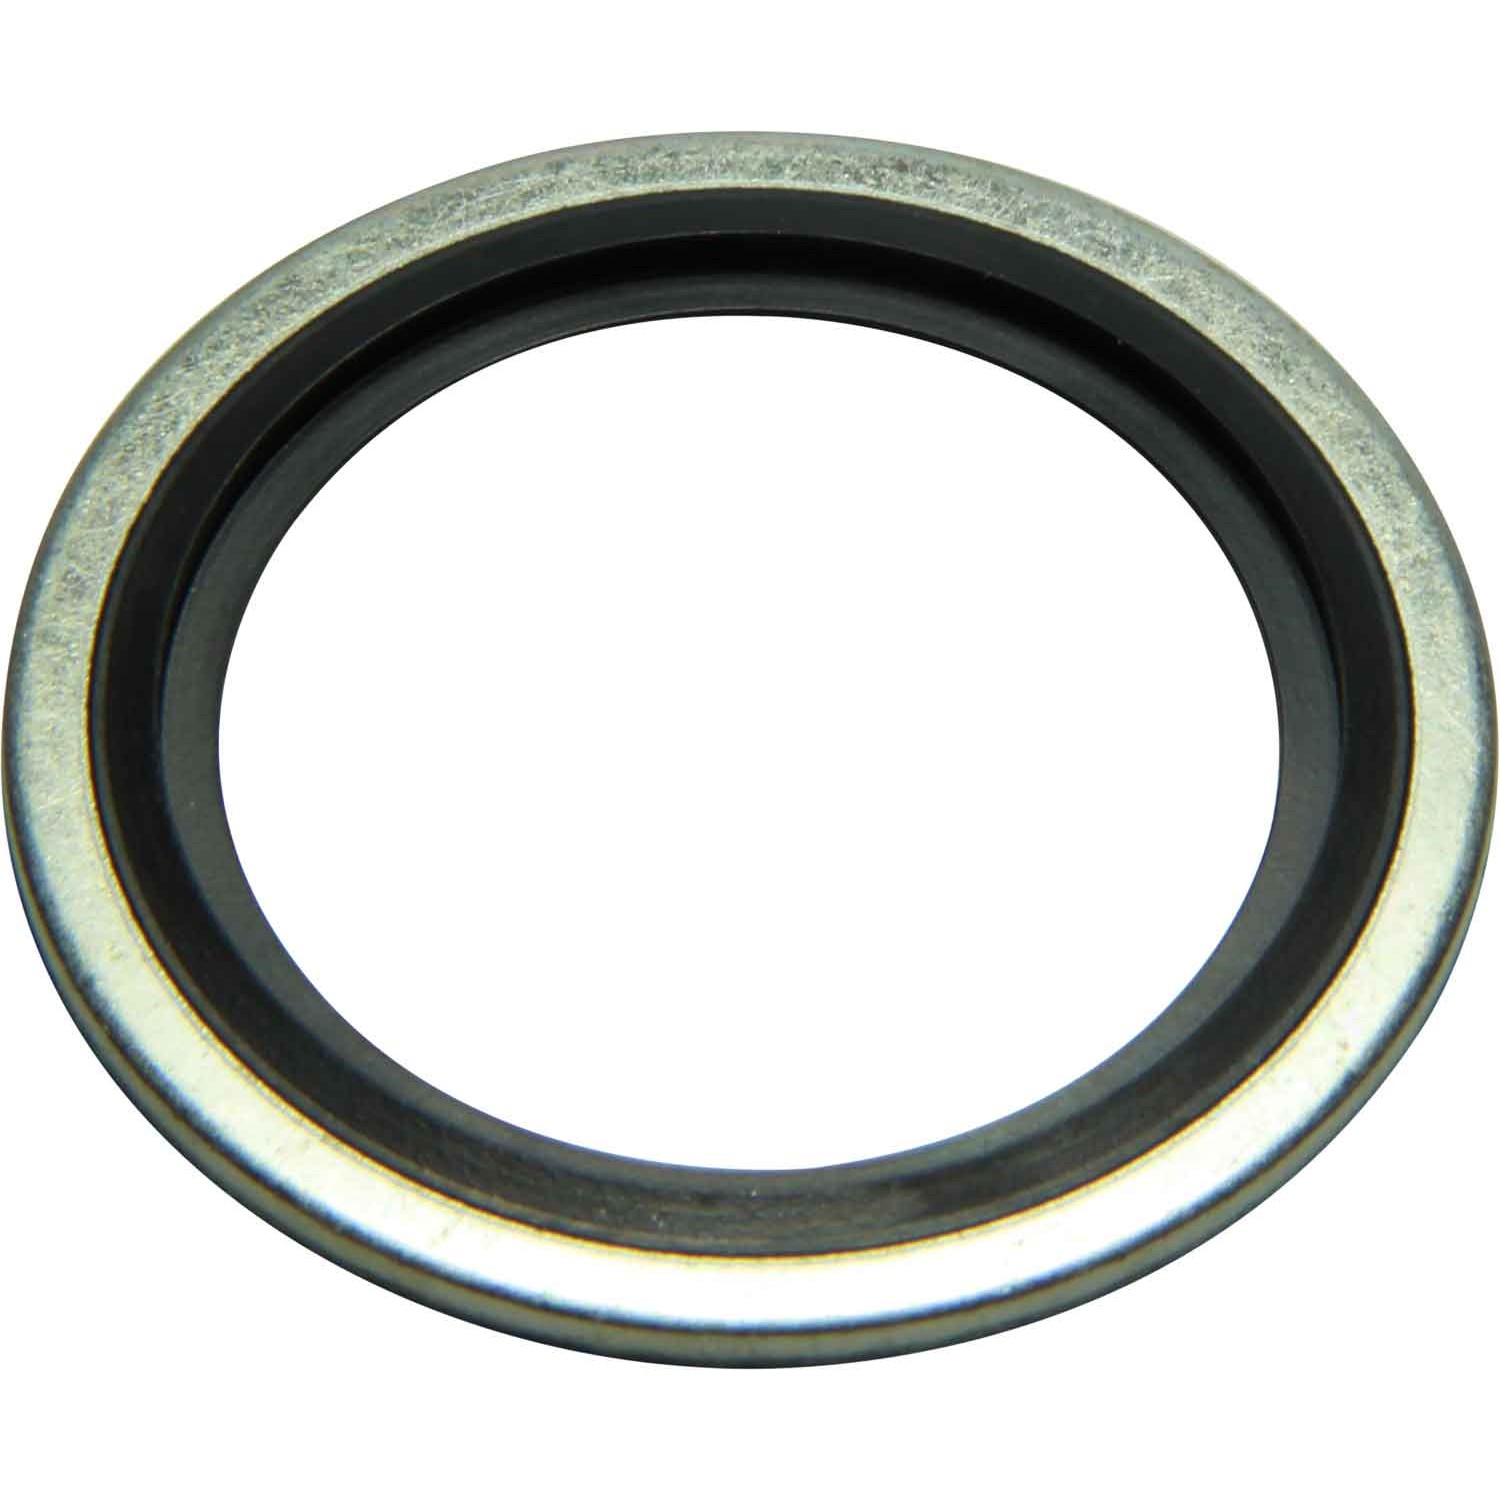 Bonded Seal Washer Imp 1/2 BSP Pk 50Connect 31783 